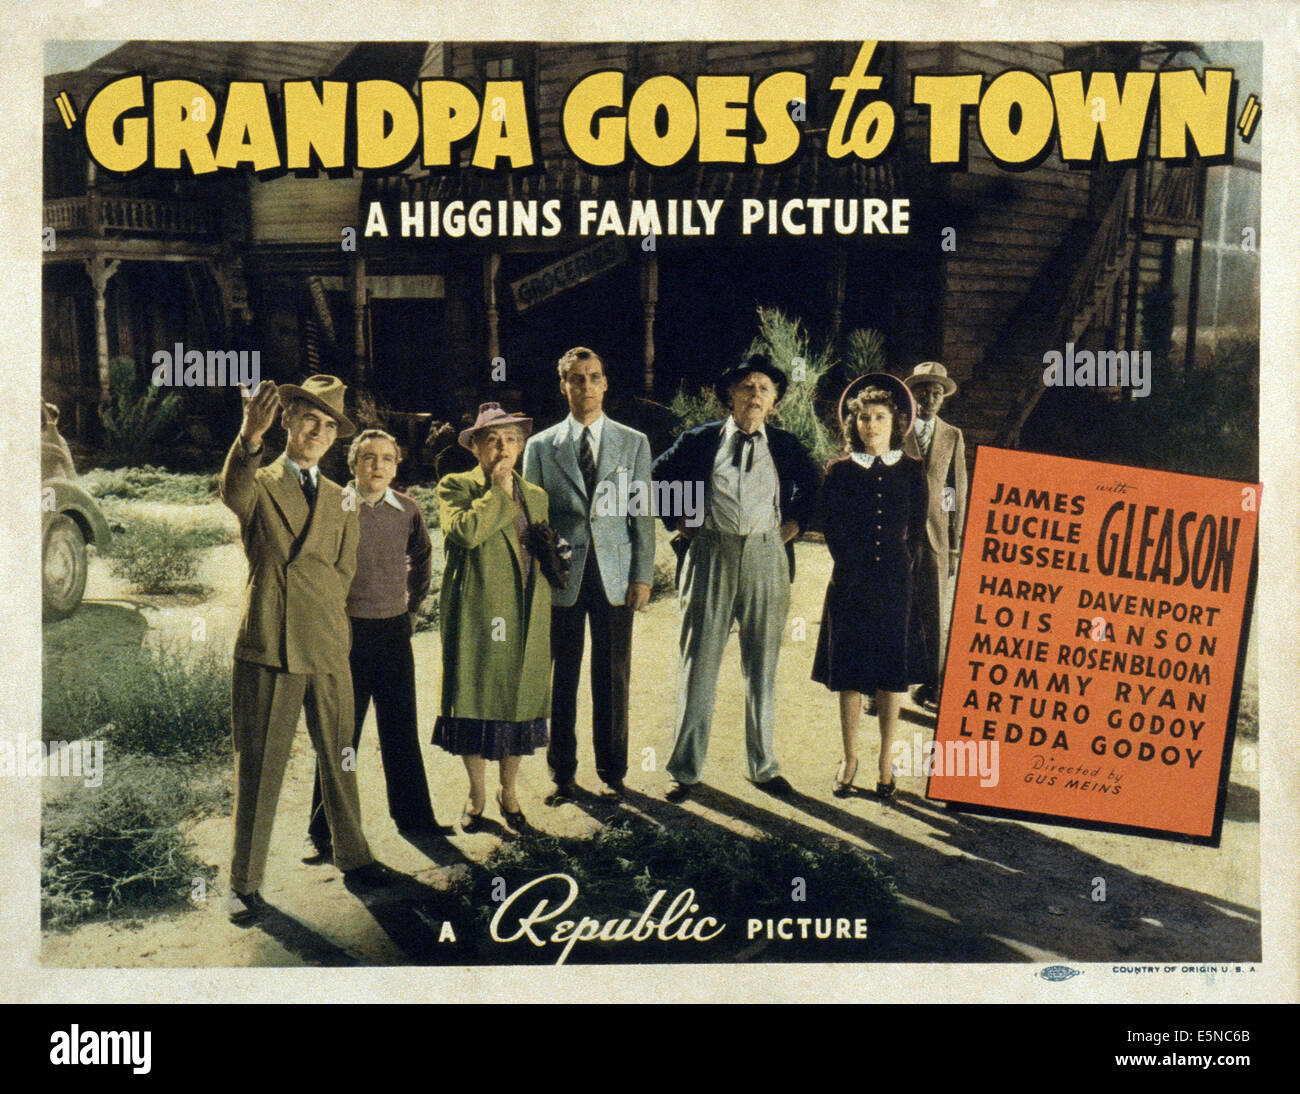 GRANDPA GOES TO TOWN, from left: James Gleason, Tommy Ryan, Lucille Gleason, Russell Gleason, Harry Davenport, Lois Ranson, 1940 Stock Photo